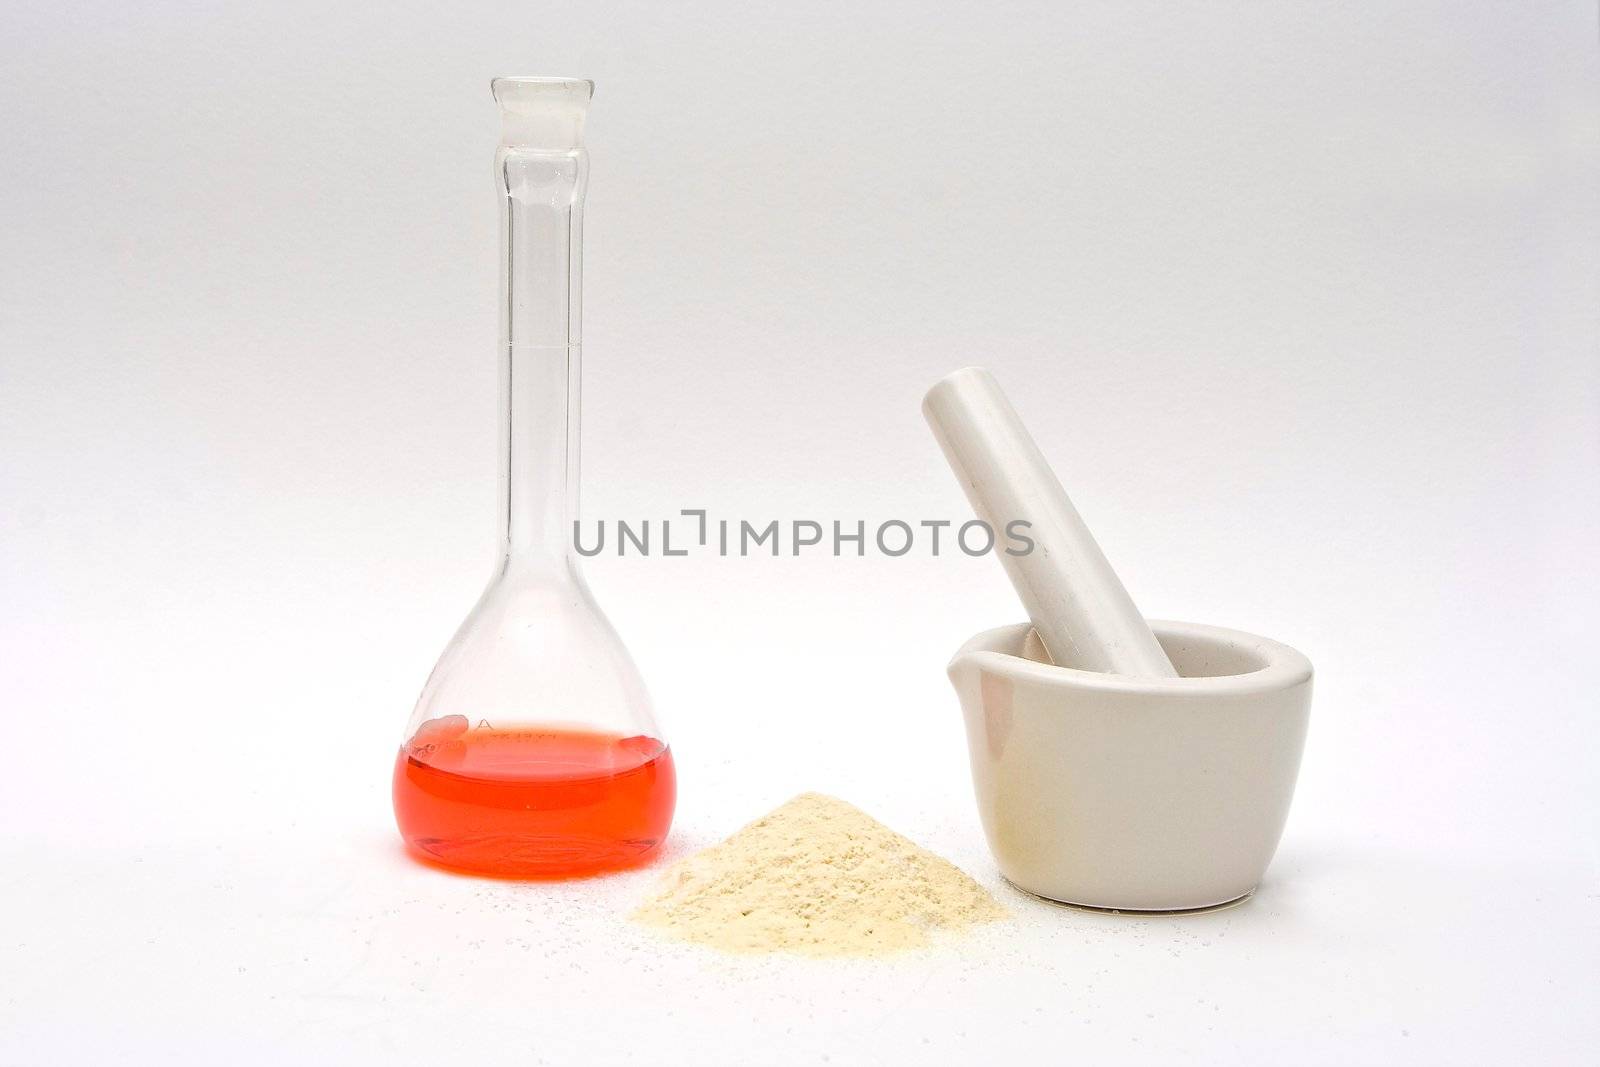 A red liquid in a flask with a powder in front and a white mortar on a white background